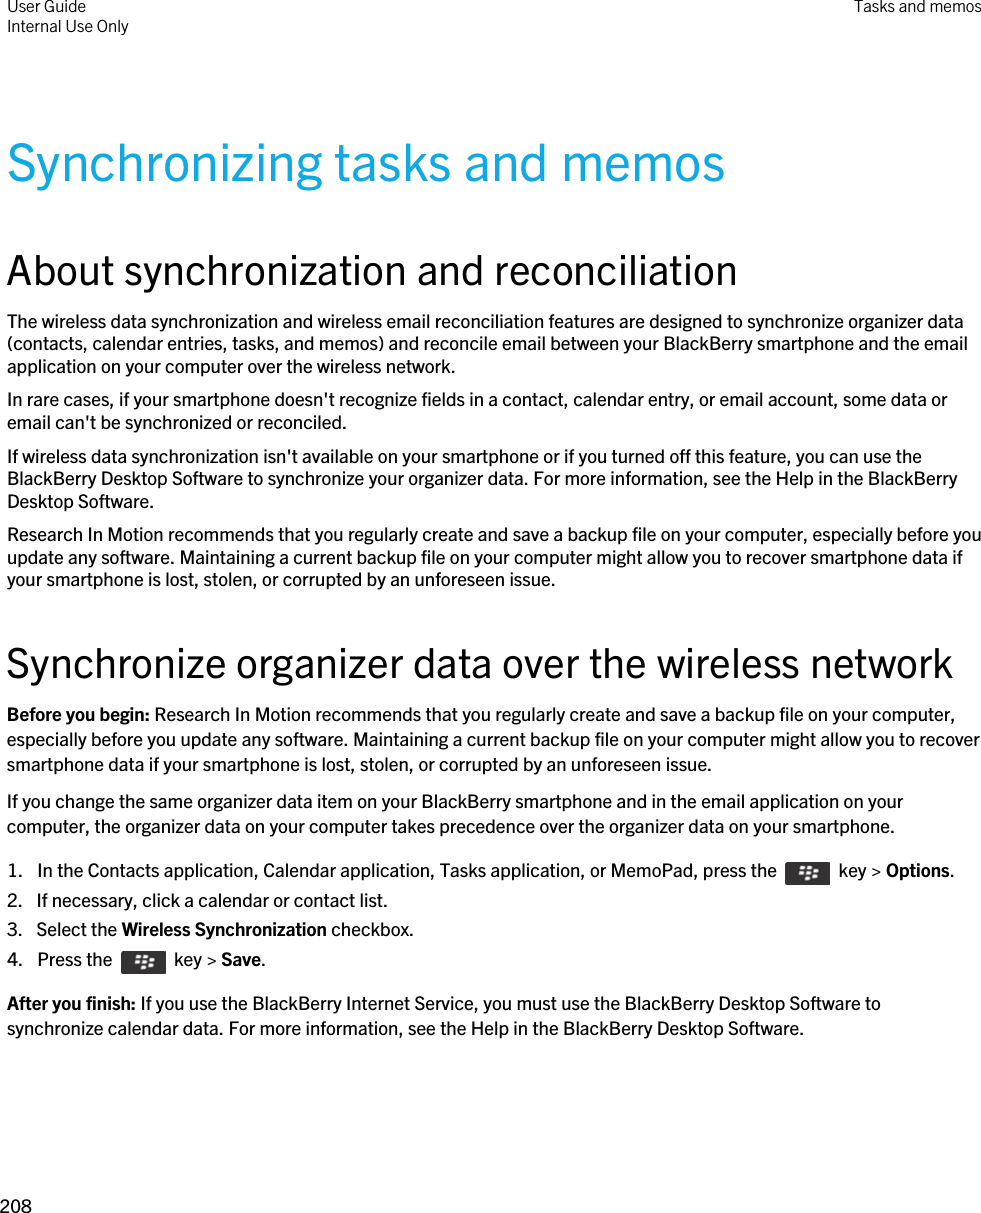 Synchronizing tasks and memosAbout synchronization and reconciliationThe wireless data synchronization and wireless email reconciliation features are designed to synchronize organizer data (contacts, calendar entries, tasks, and memos) and reconcile email between your BlackBerry smartphone and the email application on your computer over the wireless network.In rare cases, if your smartphone doesn&apos;t recognize fields in a contact, calendar entry, or email account, some data or email can&apos;t be synchronized or reconciled.If wireless data synchronization isn&apos;t available on your smartphone or if you turned off this feature, you can use the BlackBerry Desktop Software to synchronize your organizer data. For more information, see the Help in the BlackBerry Desktop Software.Research In Motion recommends that you regularly create and save a backup file on your computer, especially before you update any software. Maintaining a current backup file on your computer might allow you to recover smartphone data if your smartphone is lost, stolen, or corrupted by an unforeseen issue.Synchronize organizer data over the wireless networkBefore you begin: Research In Motion recommends that you regularly create and save a backup file on your computer, especially before you update any software. Maintaining a current backup file on your computer might allow you to recover smartphone data if your smartphone is lost, stolen, or corrupted by an unforeseen issue.If you change the same organizer data item on your BlackBerry smartphone and in the email application on your computer, the organizer data on your computer takes precedence over the organizer data on your smartphone.1.  In the Contacts application, Calendar application, Tasks application, or MemoPad, press the    key &gt; Options. 2. If necessary, click a calendar or contact list.3. Select the Wireless Synchronization checkbox.4.  Press the    key &gt; Save. After you finish: If you use the BlackBerry Internet Service, you must use the BlackBerry Desktop Software to synchronize calendar data. For more information, see the Help in the BlackBerry Desktop Software.User GuideInternal Use Only Tasks and memos208 